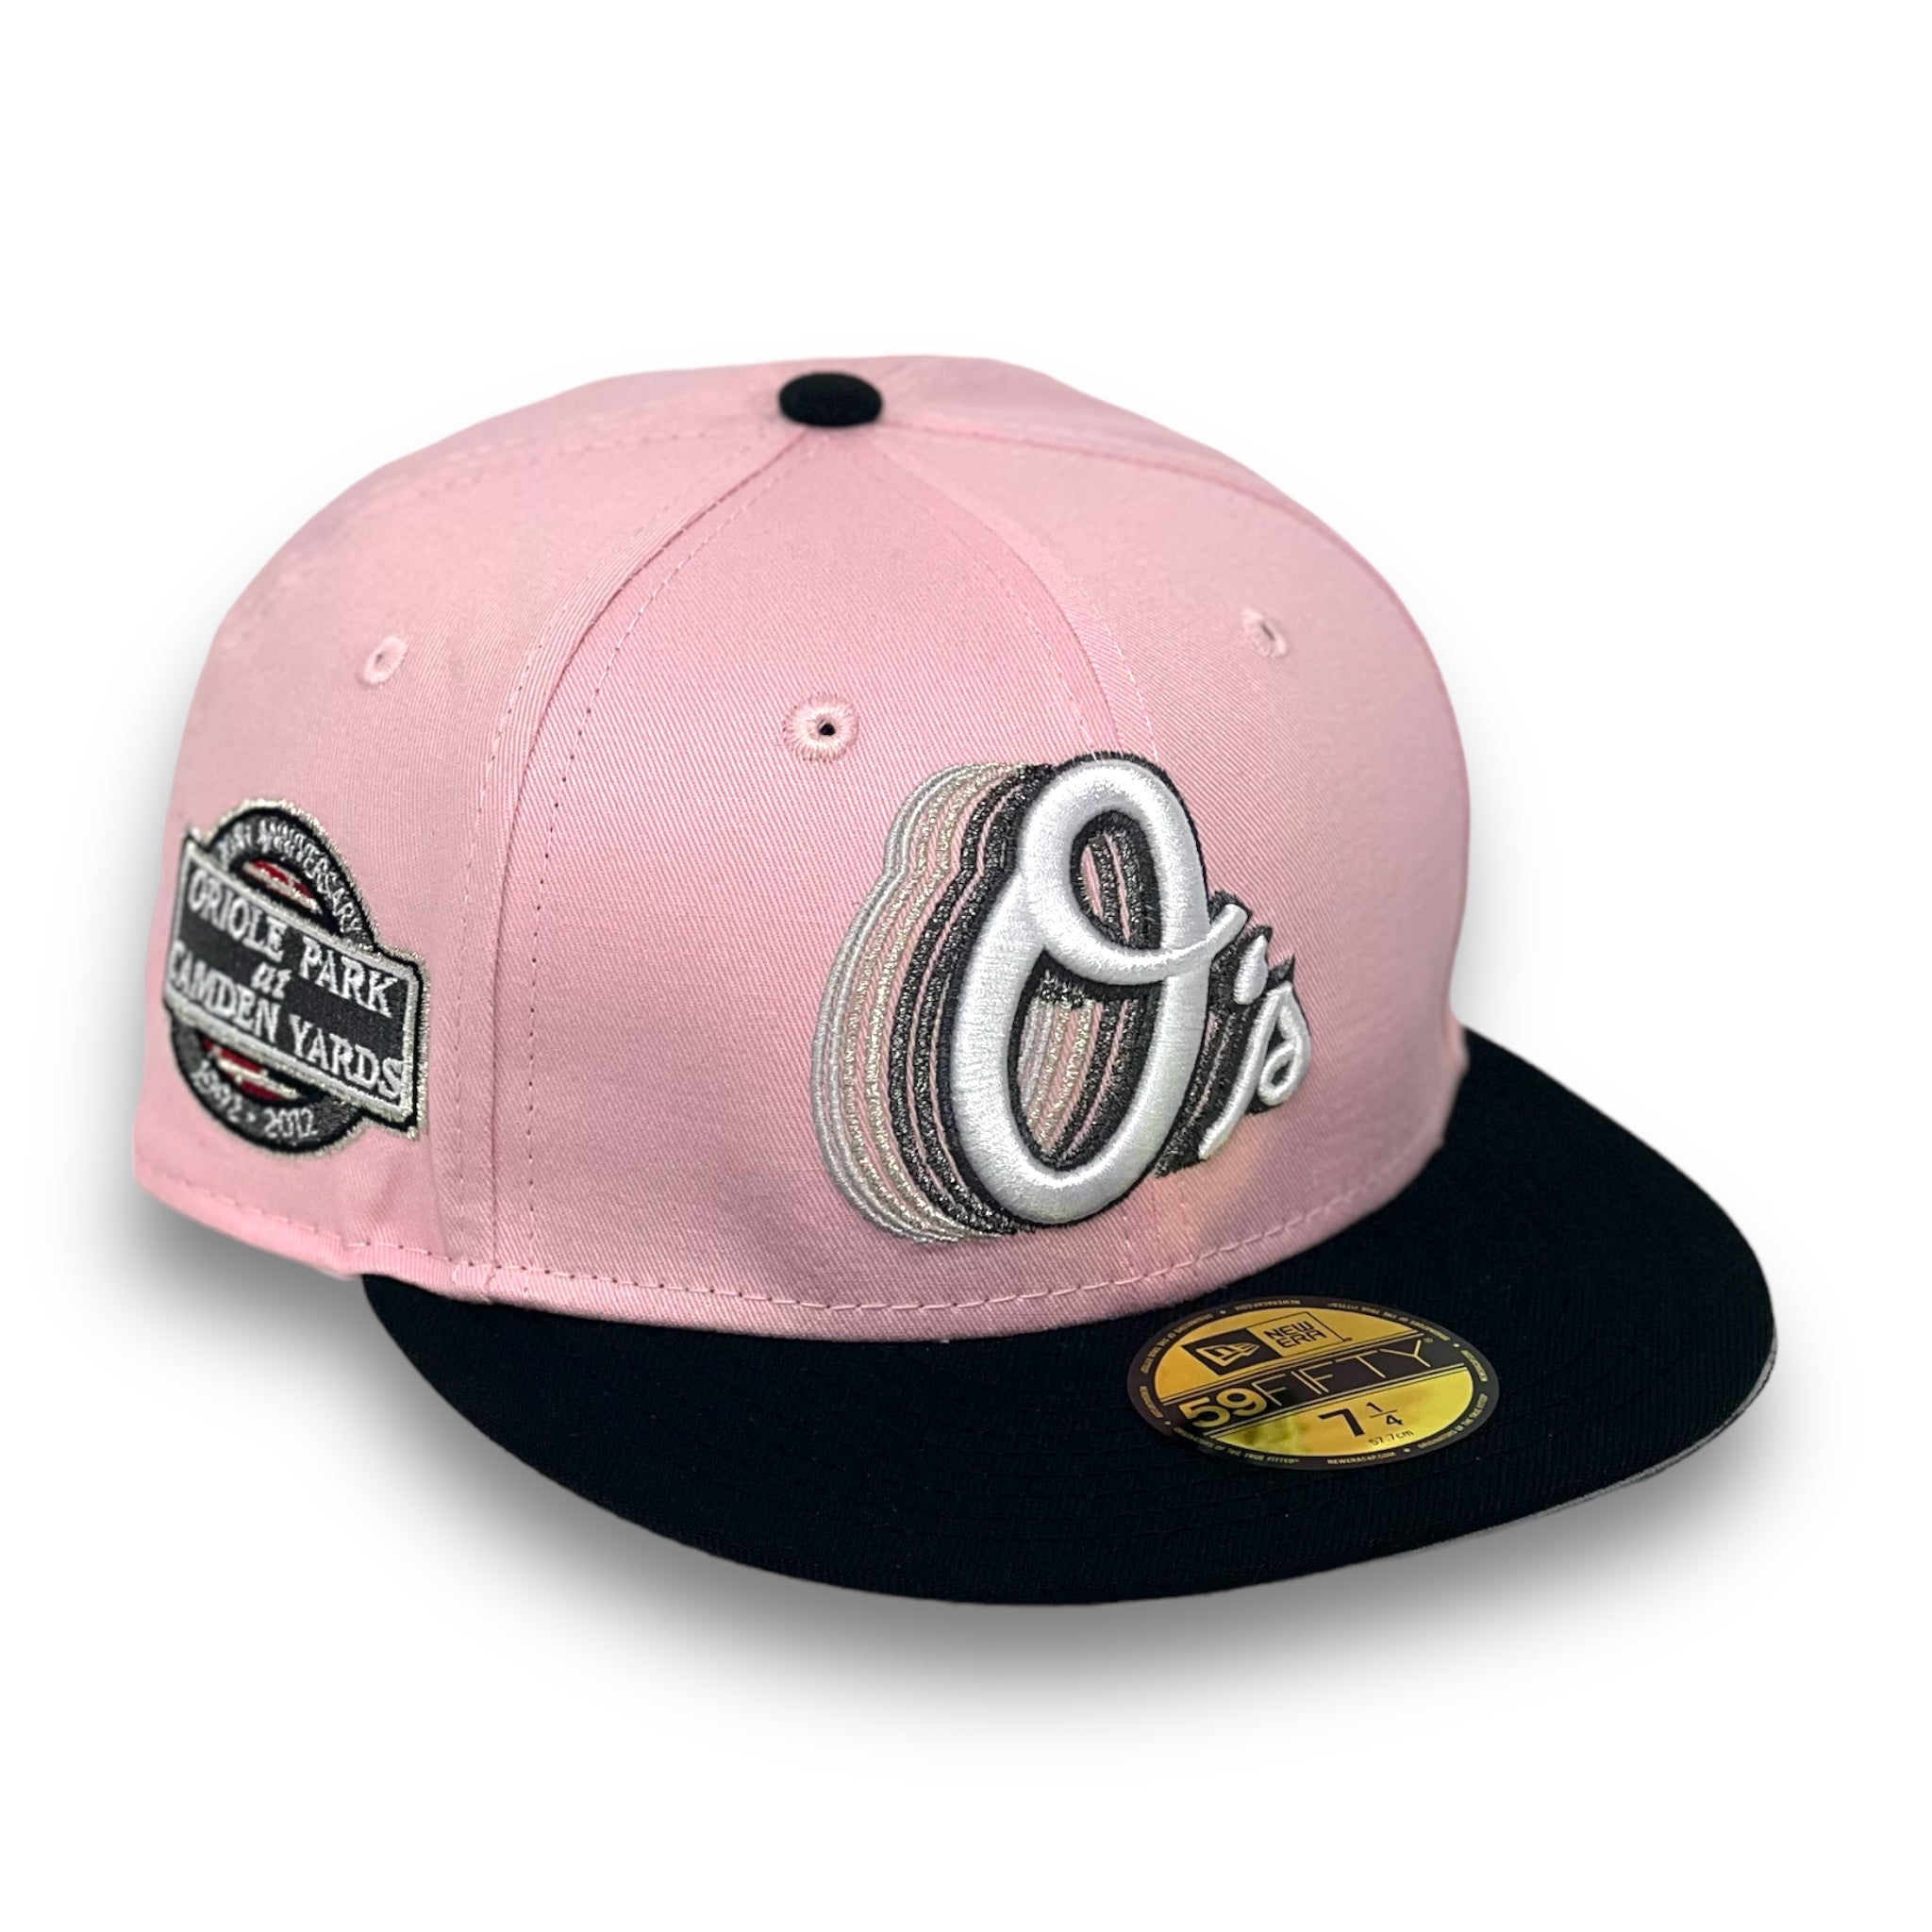 BALTIMORES ORIOLES (PINK) (20TH ANN) "ORIOLE PARK" 59FIFTY FITTED